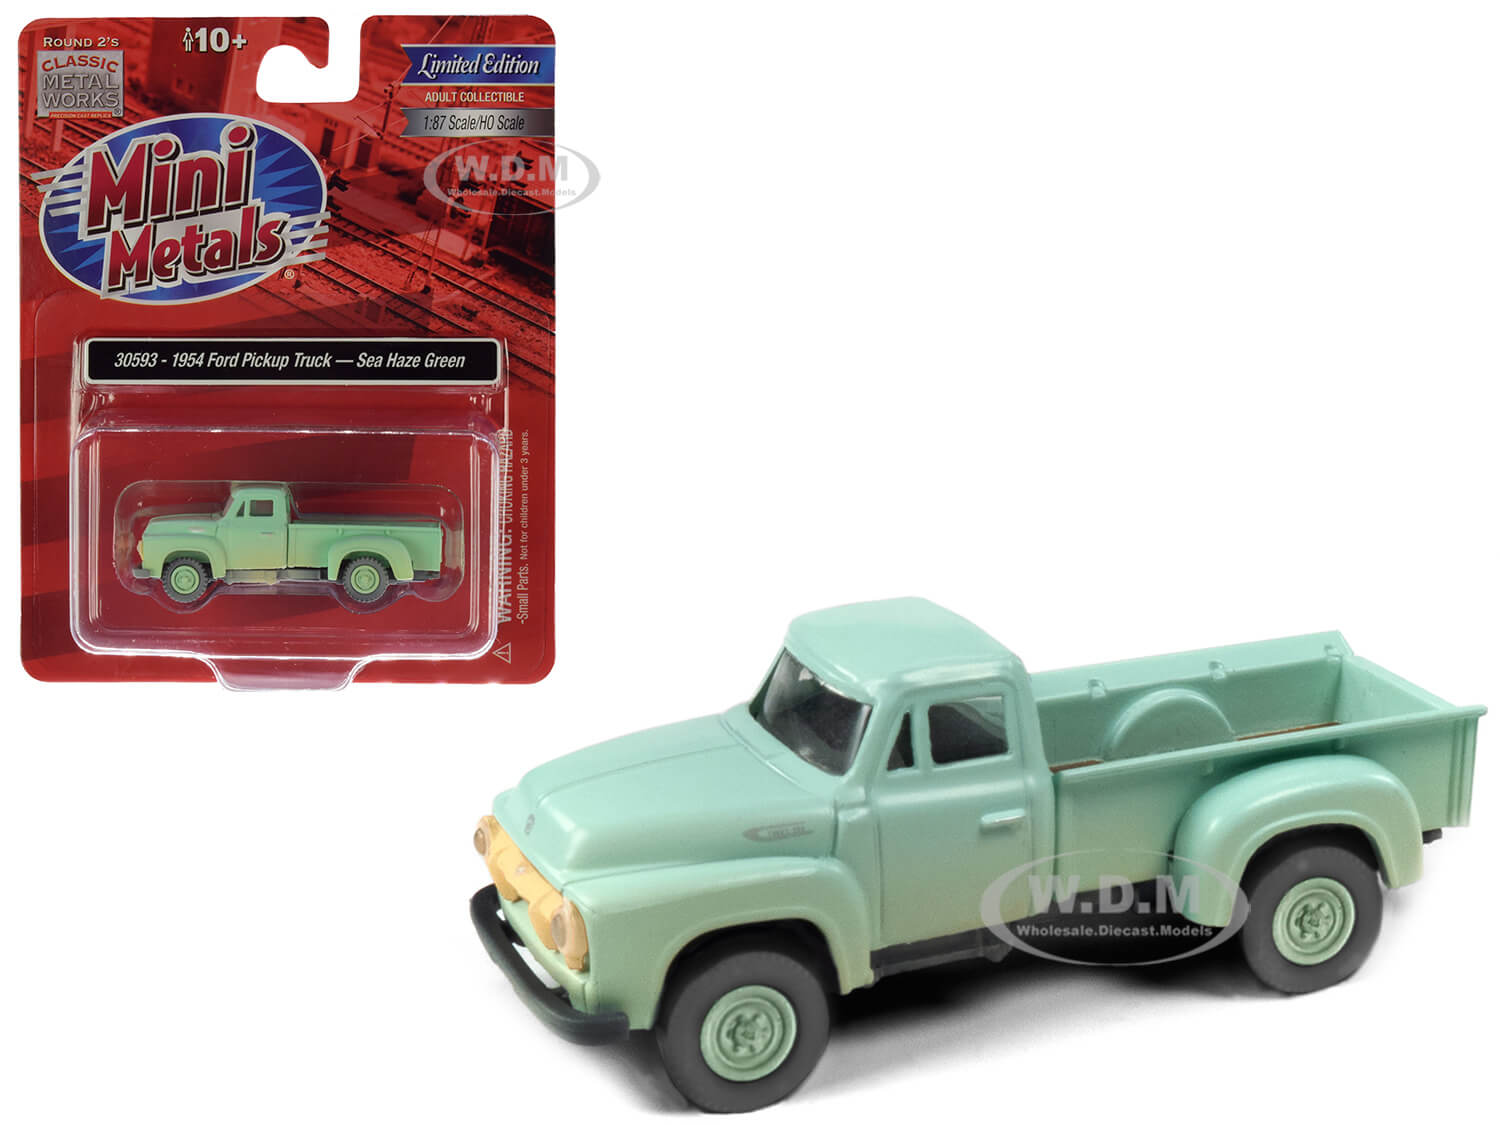 1954 Ford Pickup Truck Sea Haze Green (dirty/weathered) 1/87 (ho) Scale Model Car By Classic Metal Works